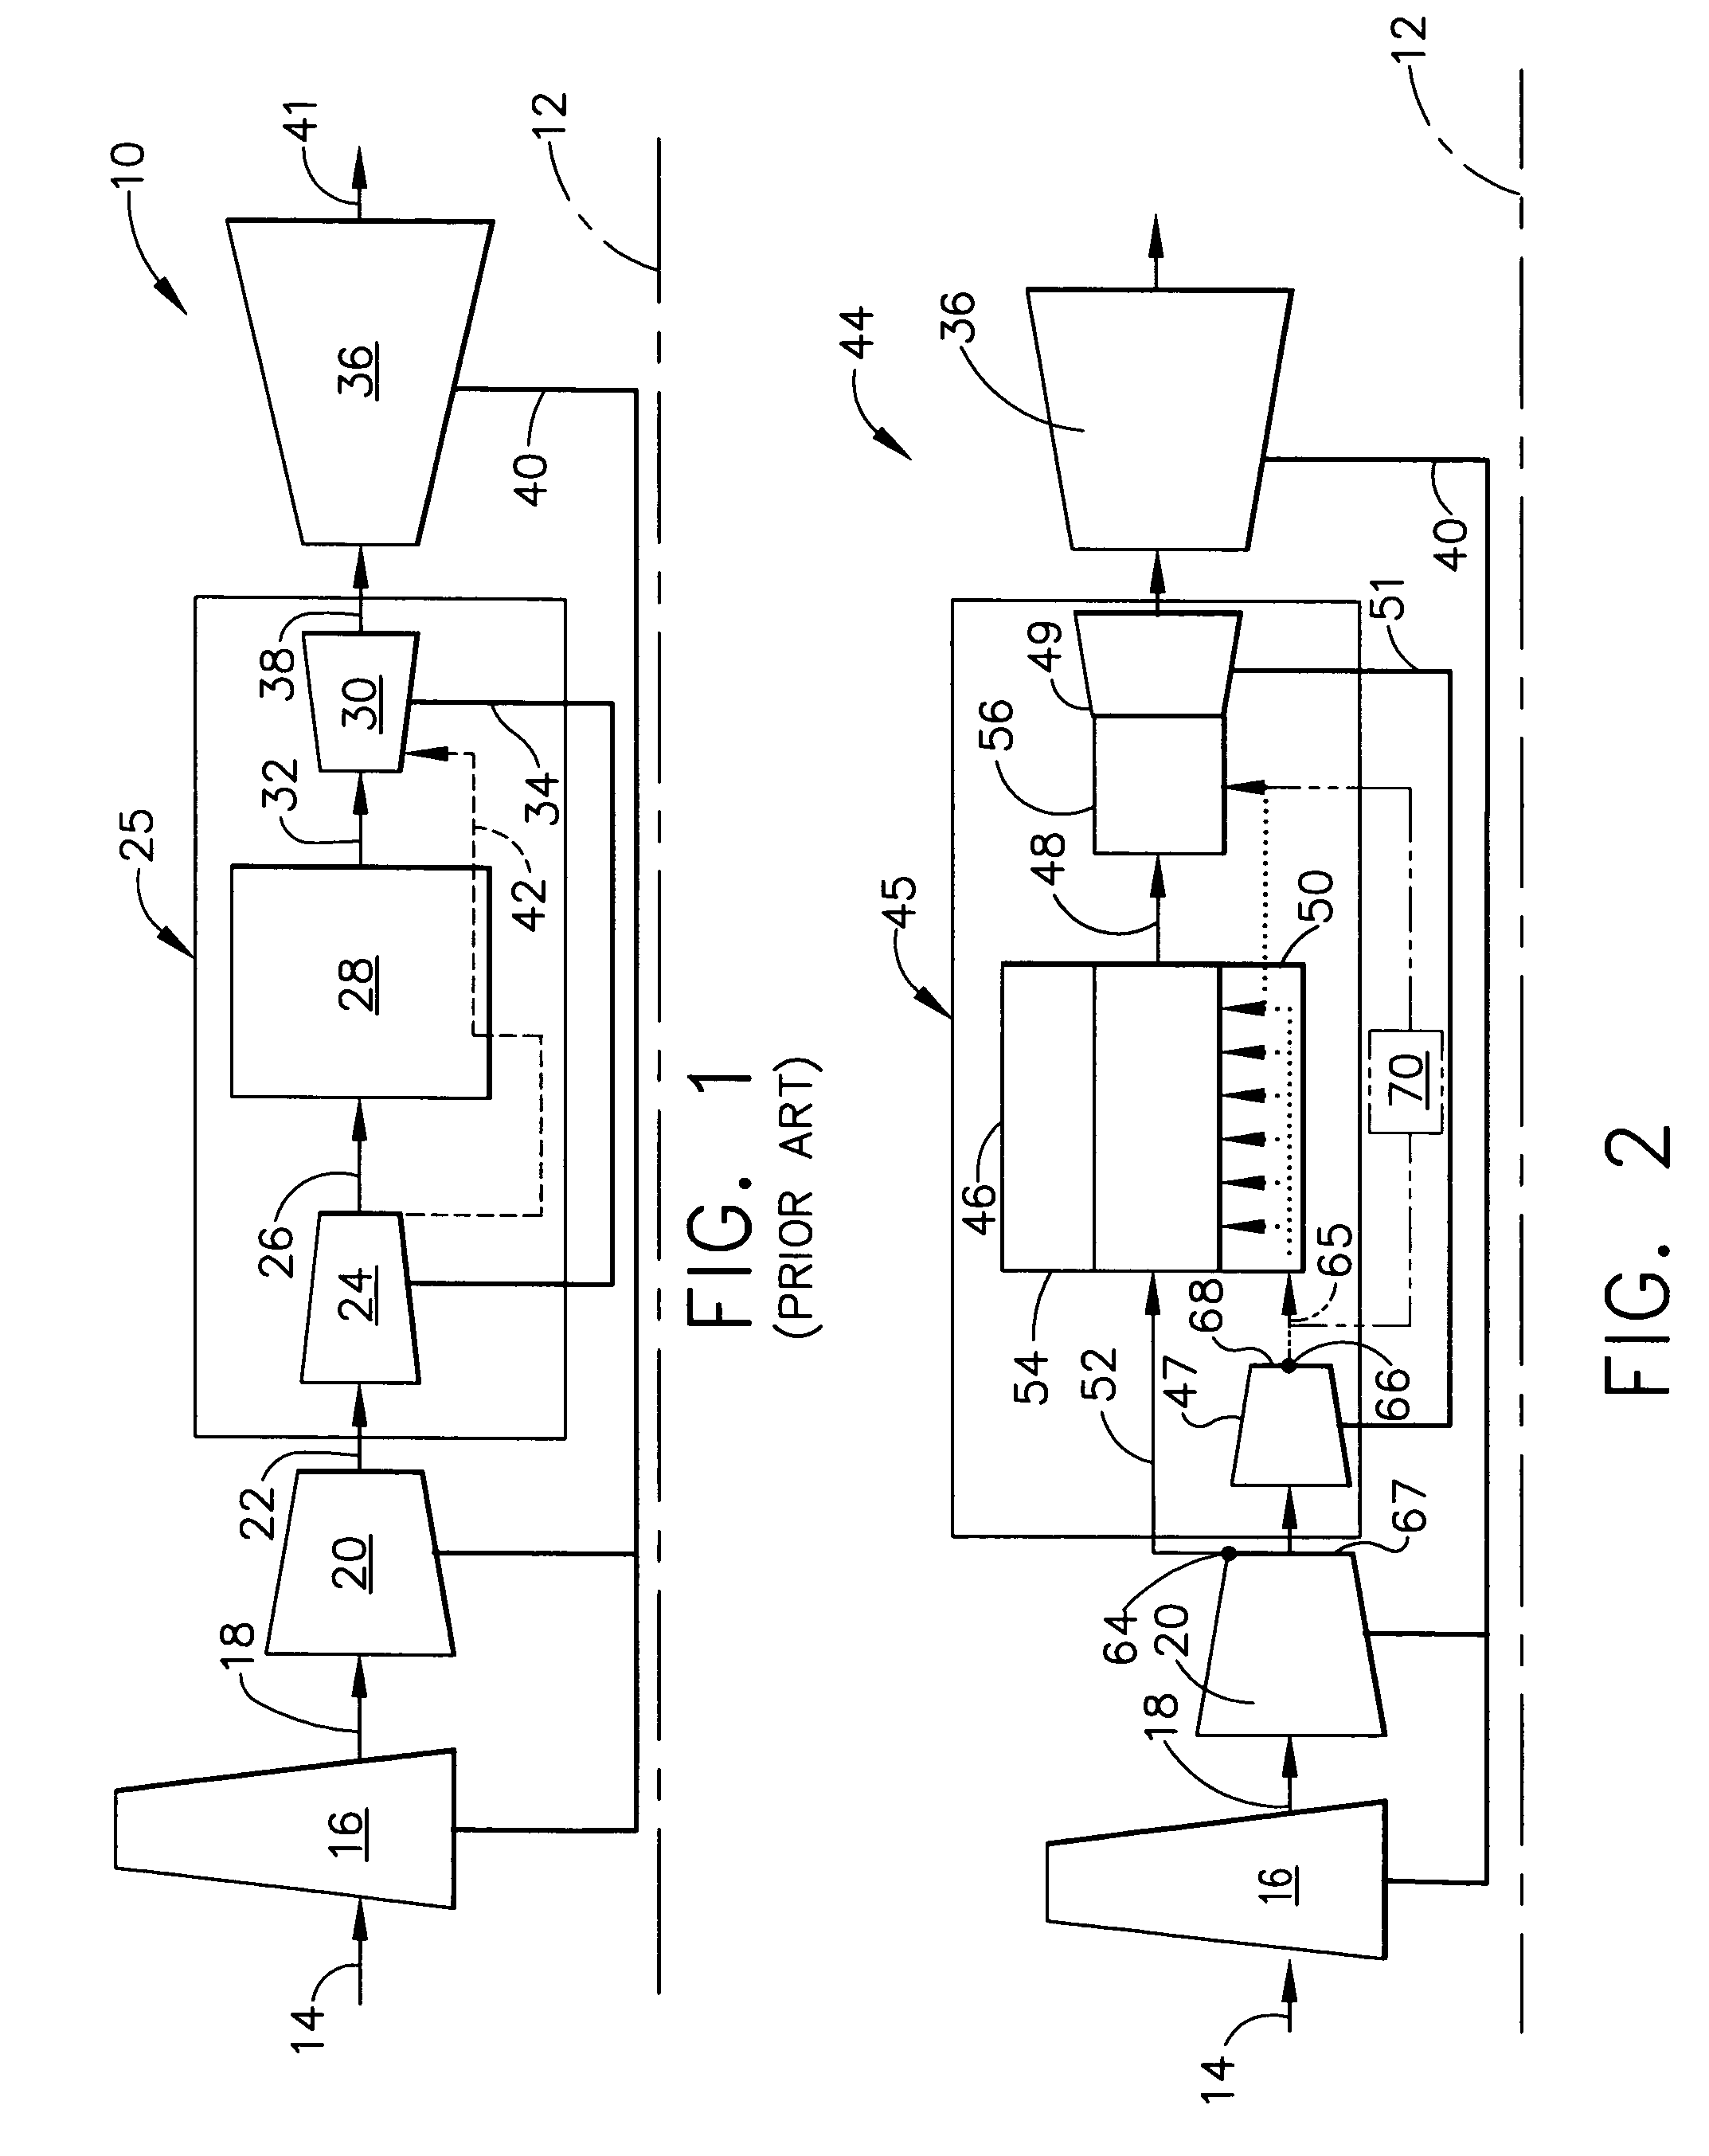 High thrust gas turbine engine with improved core system